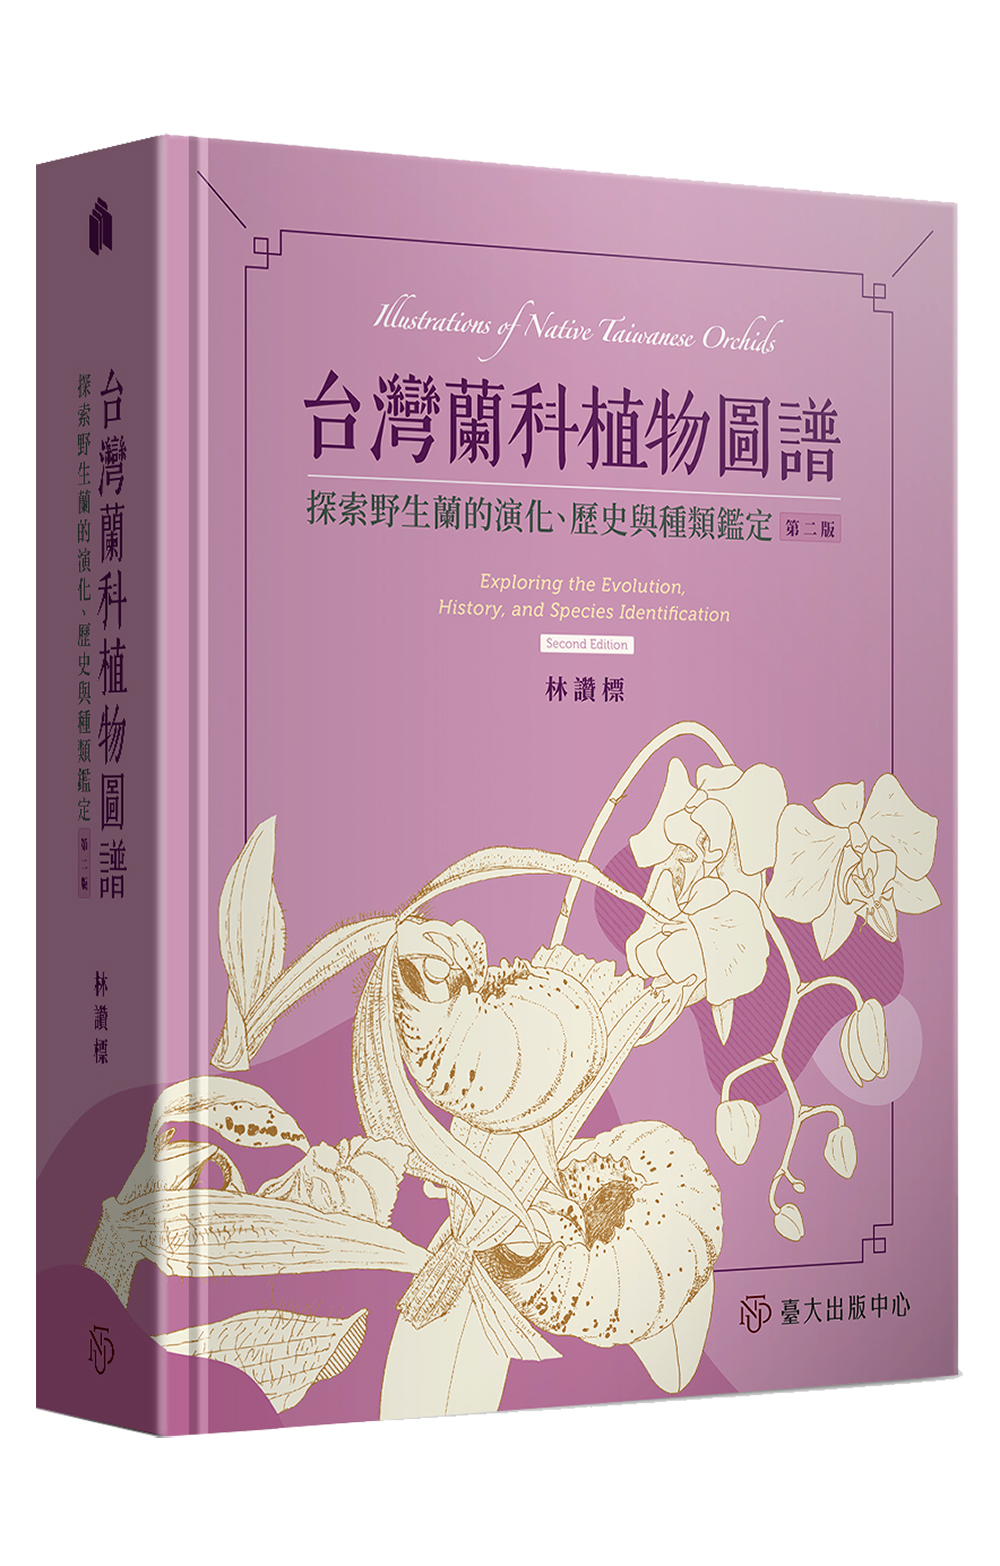 Illustrations of Native Taiwanese Orchids: Exploring the Evolution, History, and Species Identification (Second Edition)